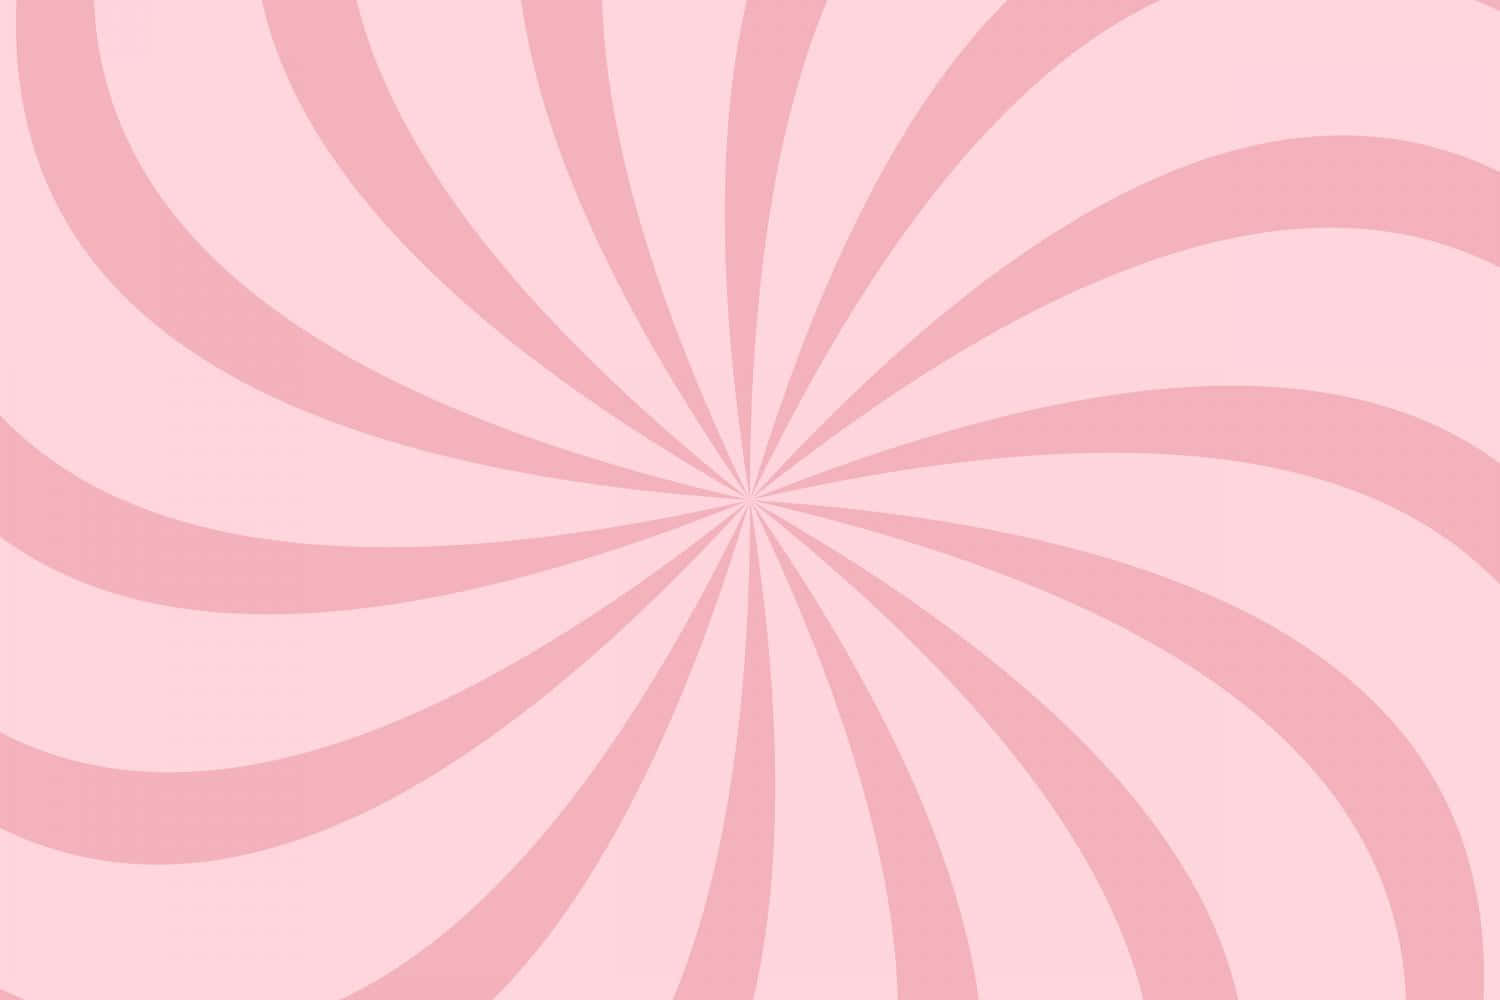 Dynamic Pink Swirl on a White Background